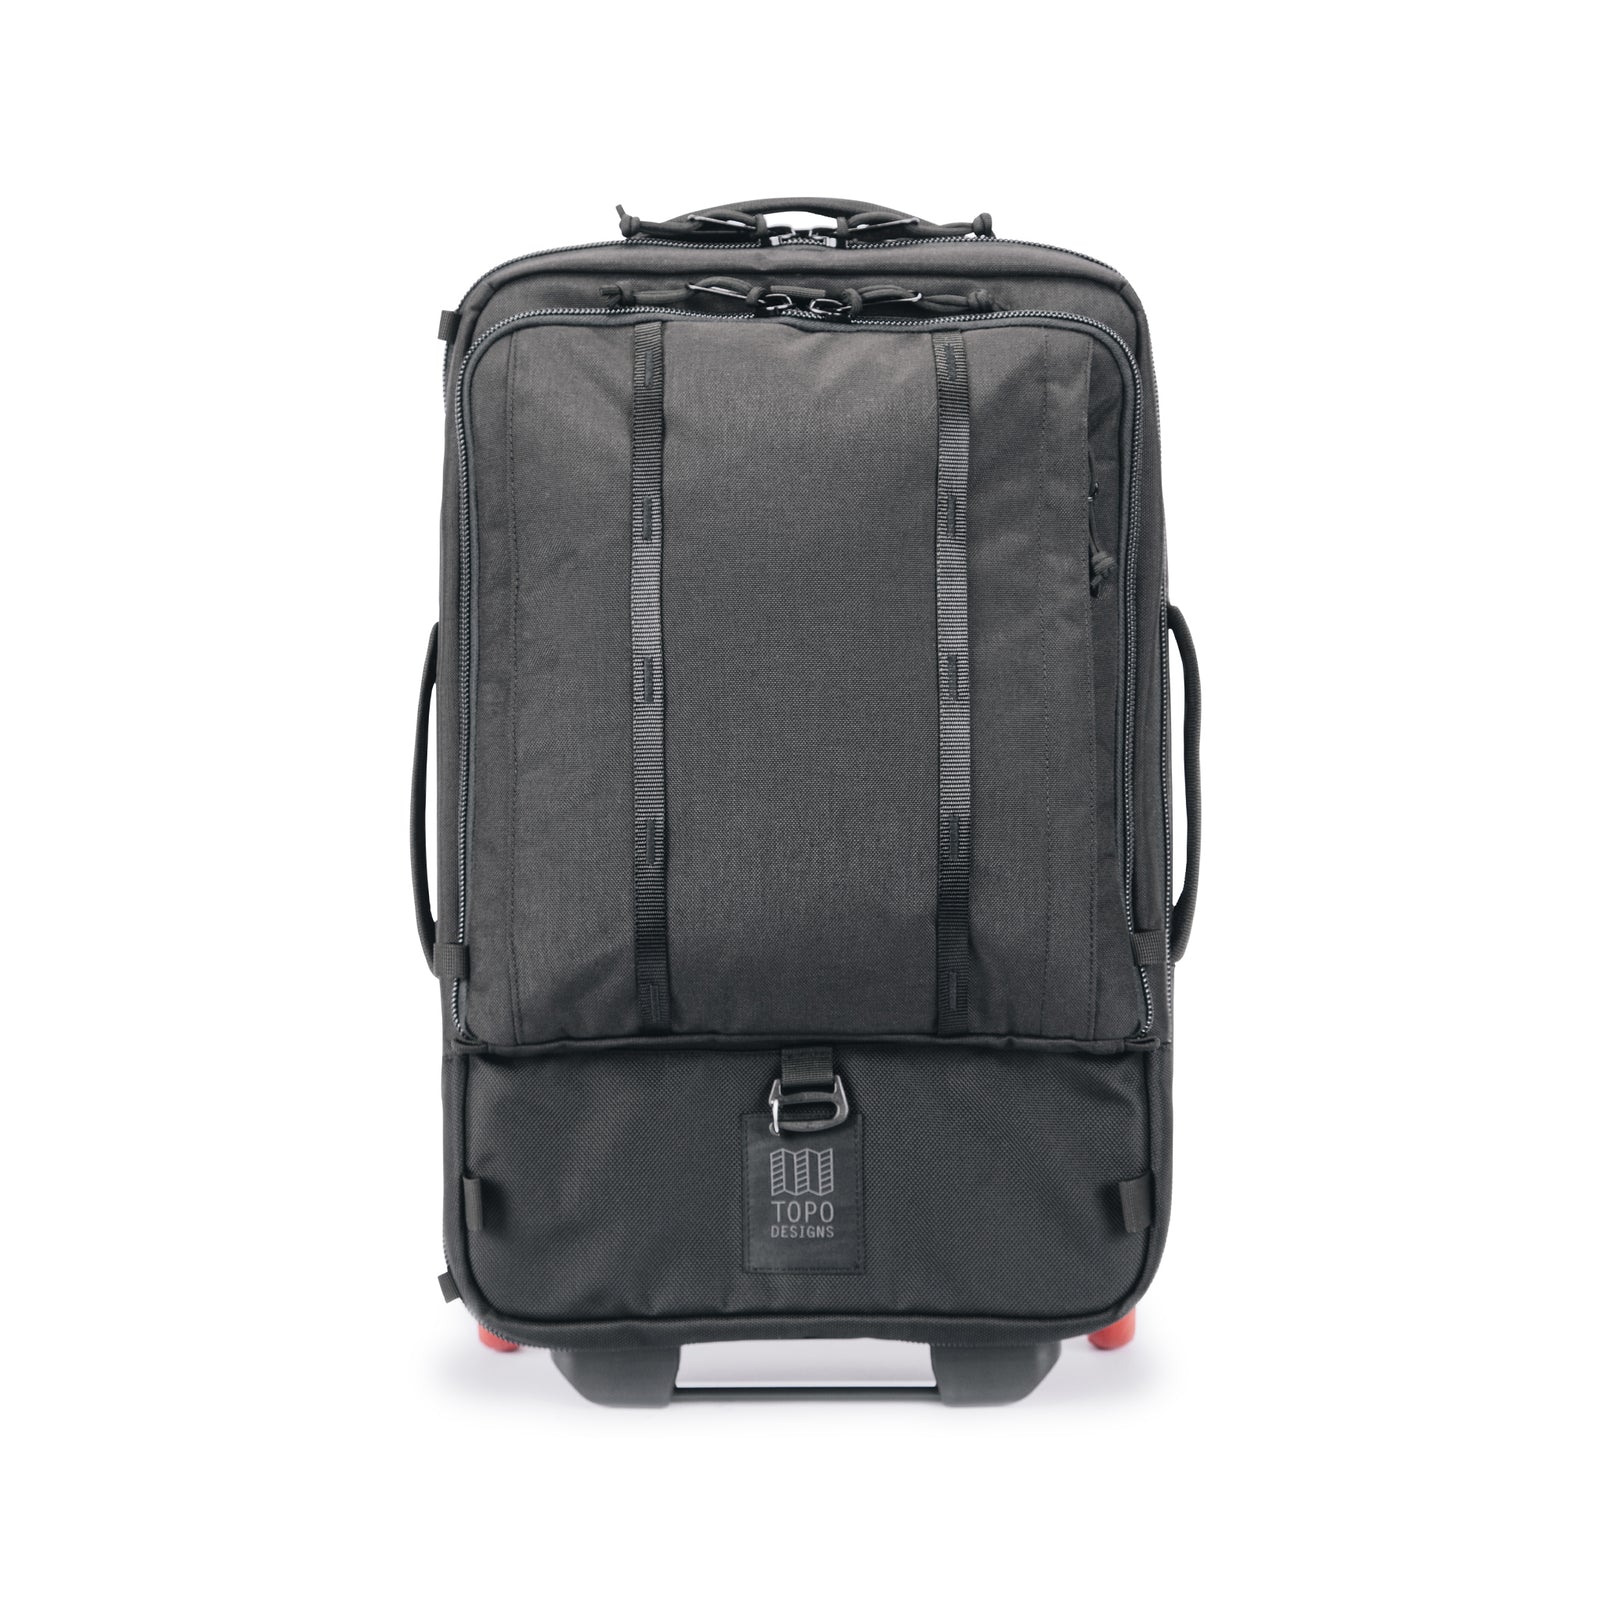 Topo Designs Global Travel Bag Roller durable carry-on convertible laptop backpack rolling suitcase in "Black".